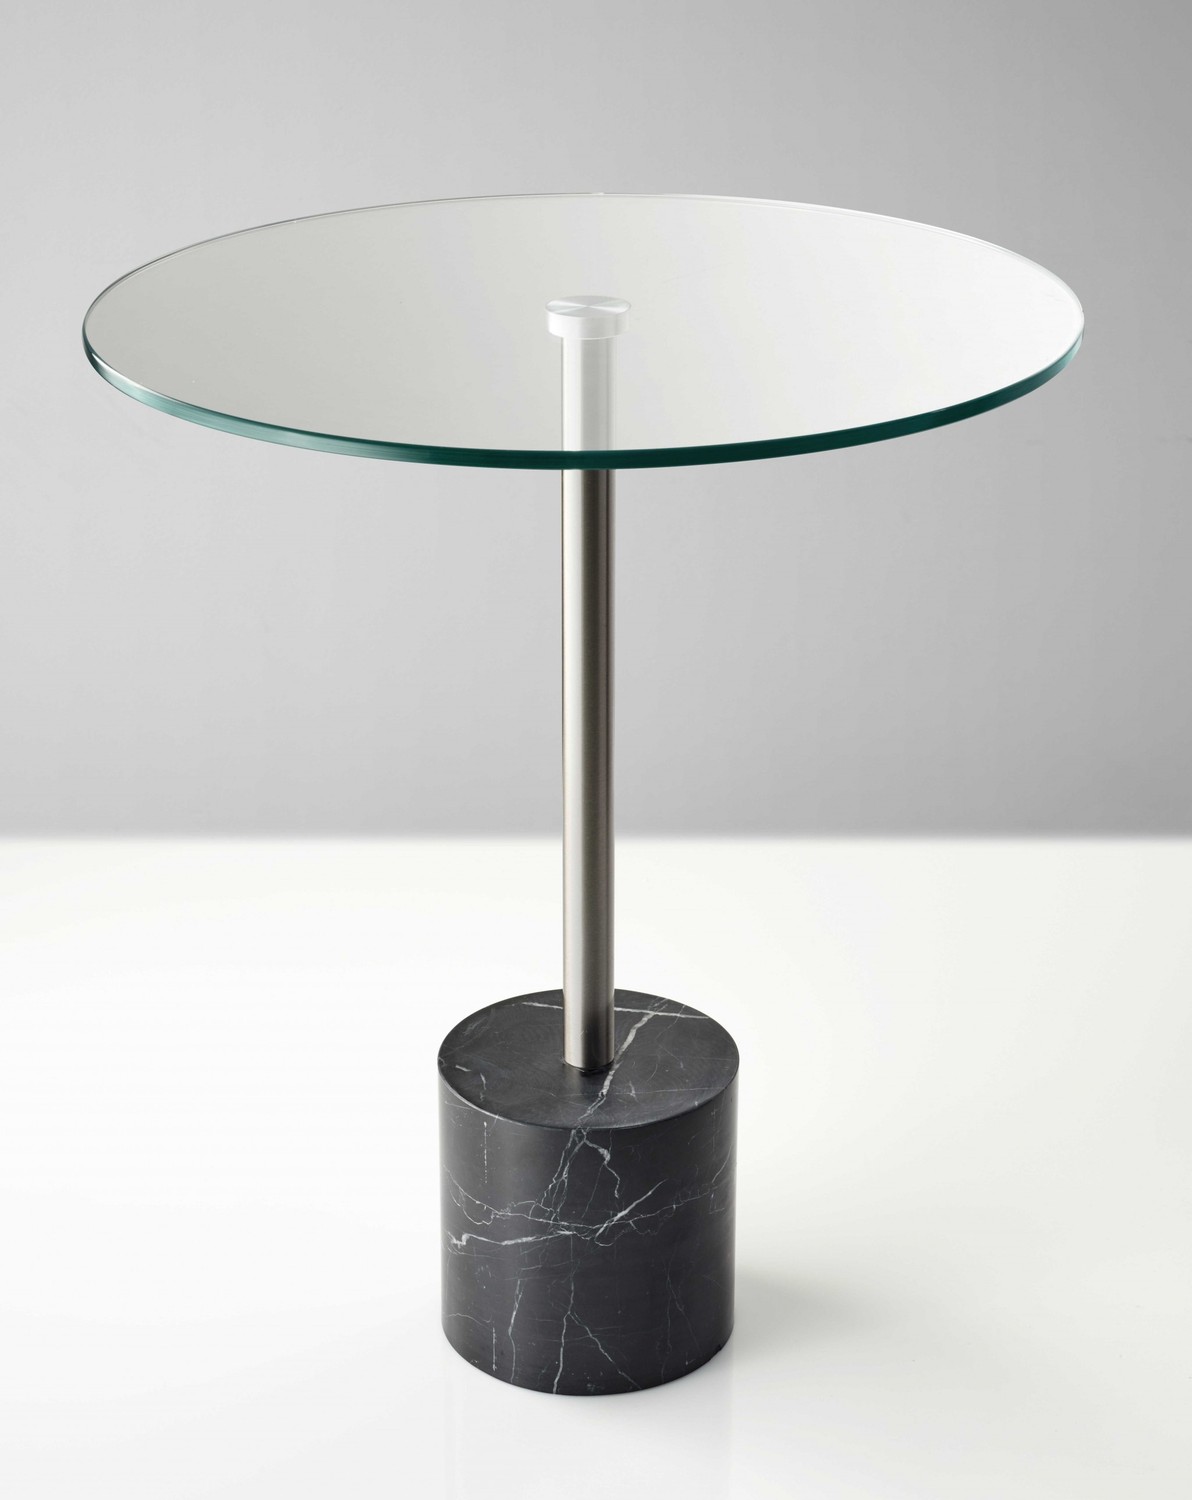 17.75" X 17.75" X 21" Brushed steel Black Marble End Table